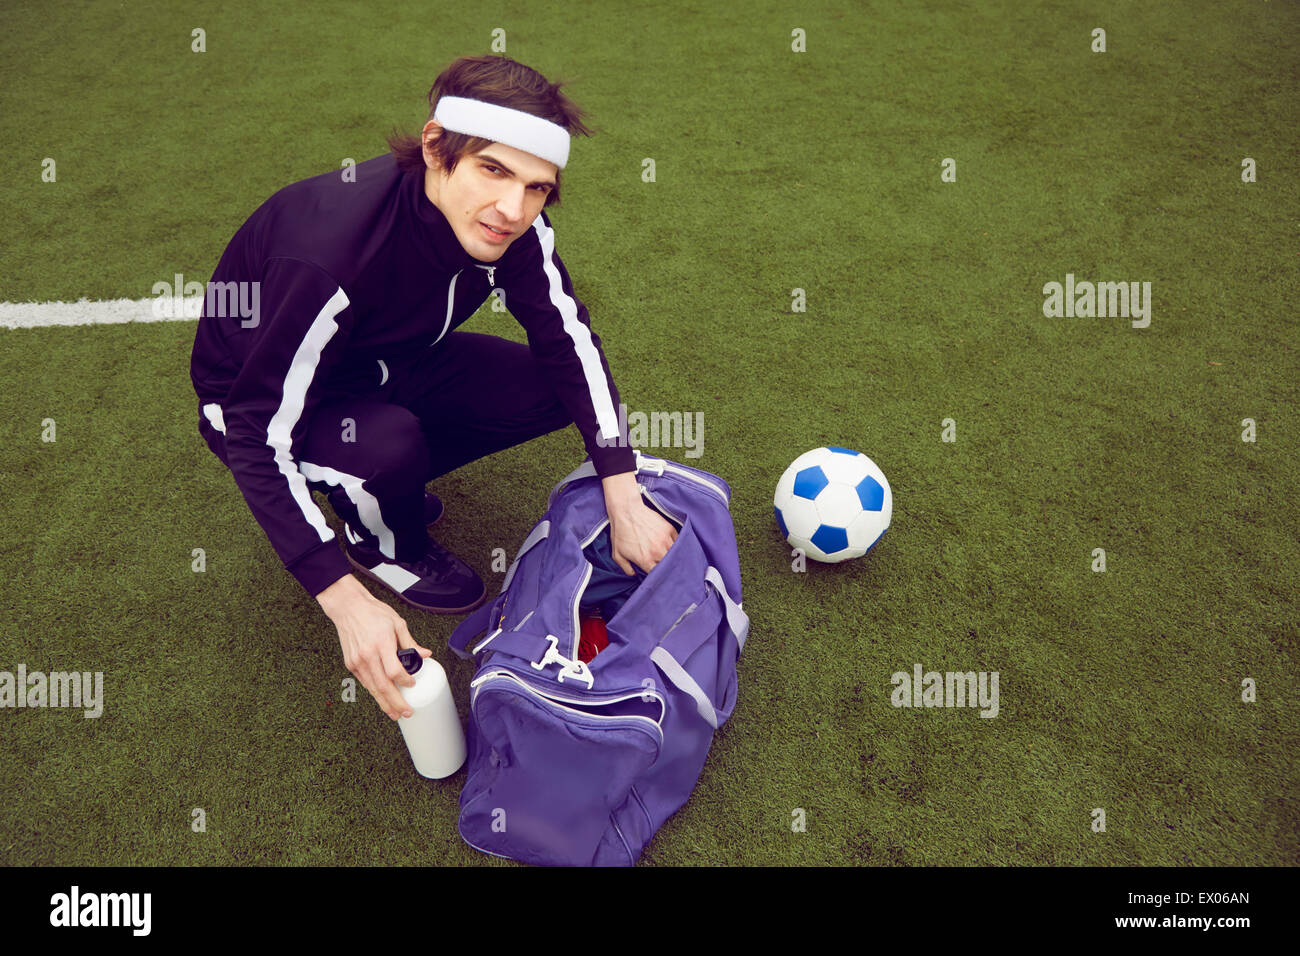 Male soccer player preparing to play on soccer pitch Stock Photo